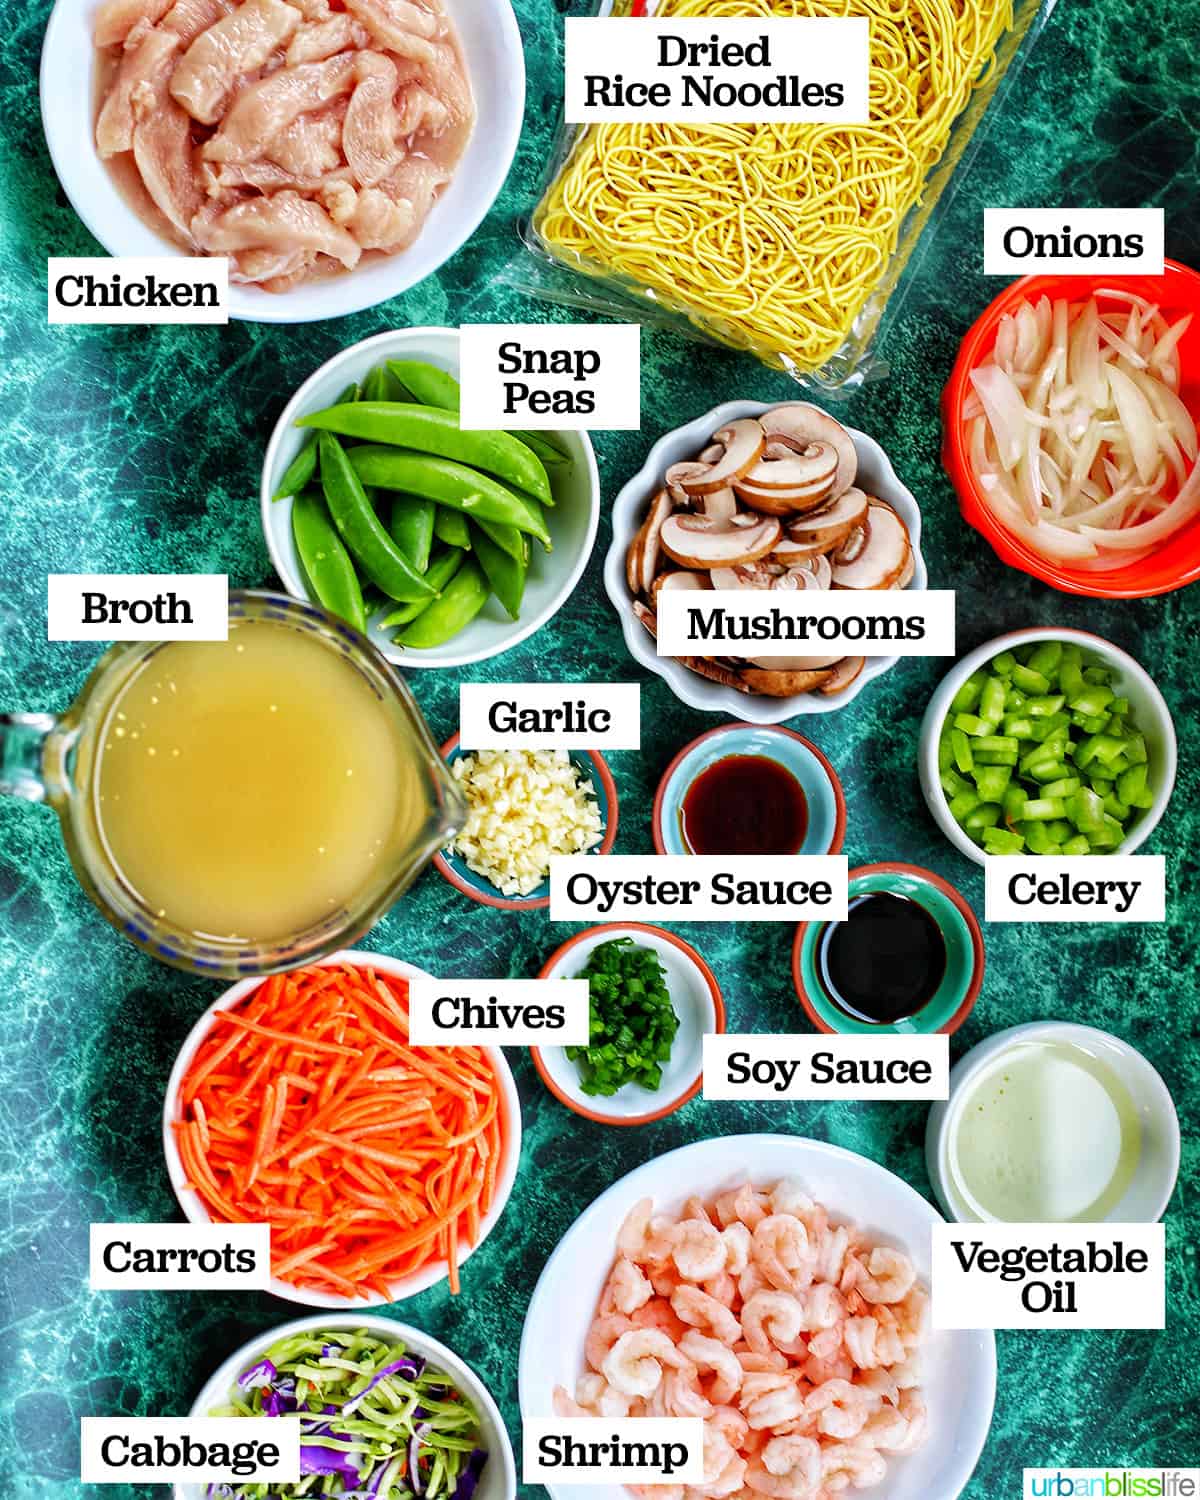 ingredients for making Filipino pancit canton noodles, including shrimp, chicken, broth, noodles, and lots of vegetables.